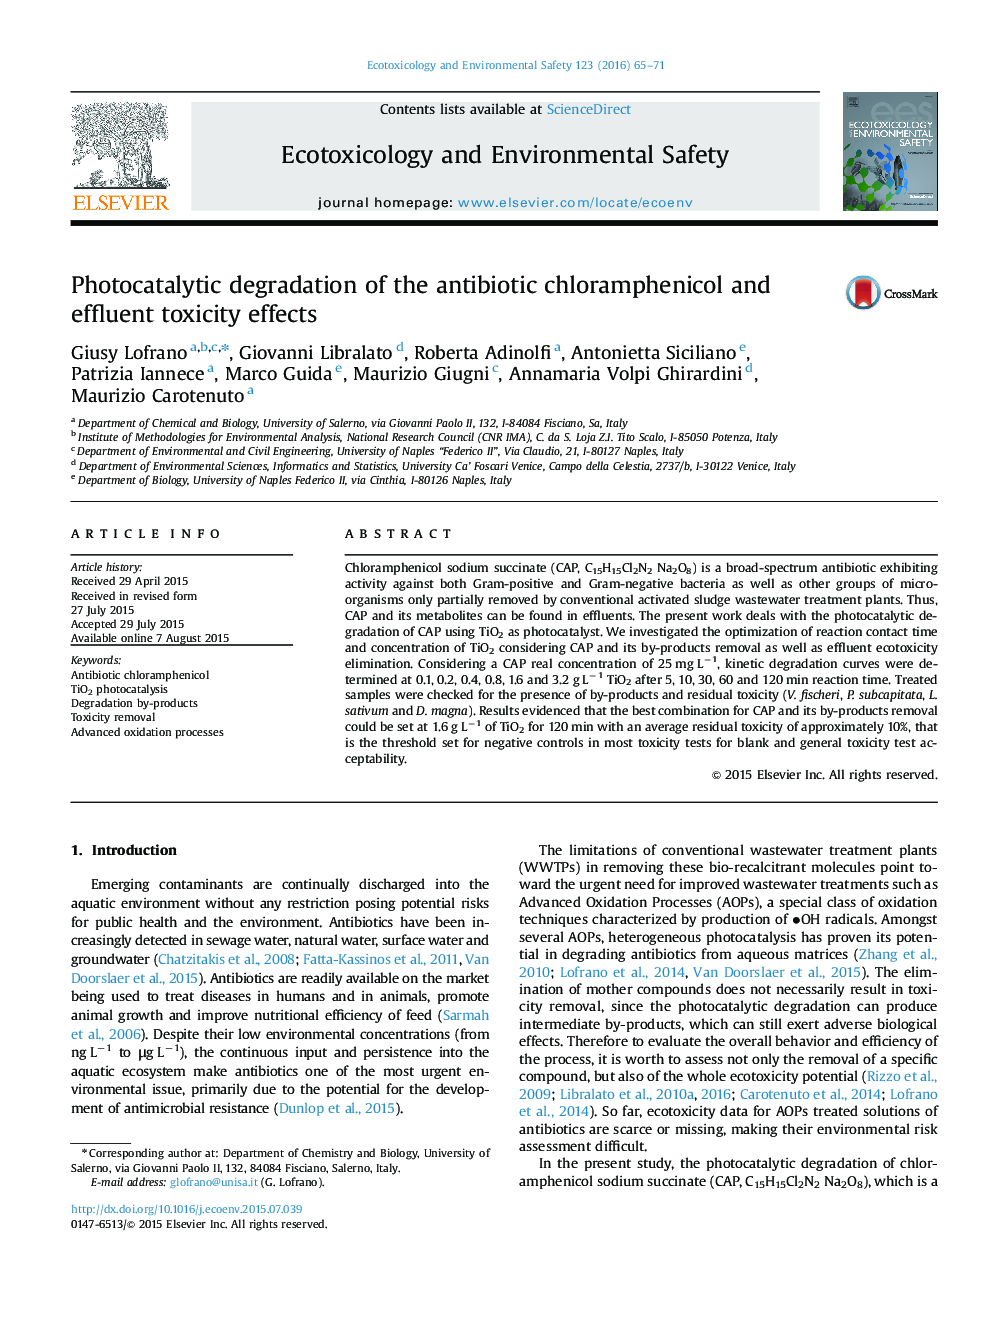 Photocatalytic degradation of the antibiotic chloramphenicol and effluent toxicity effects